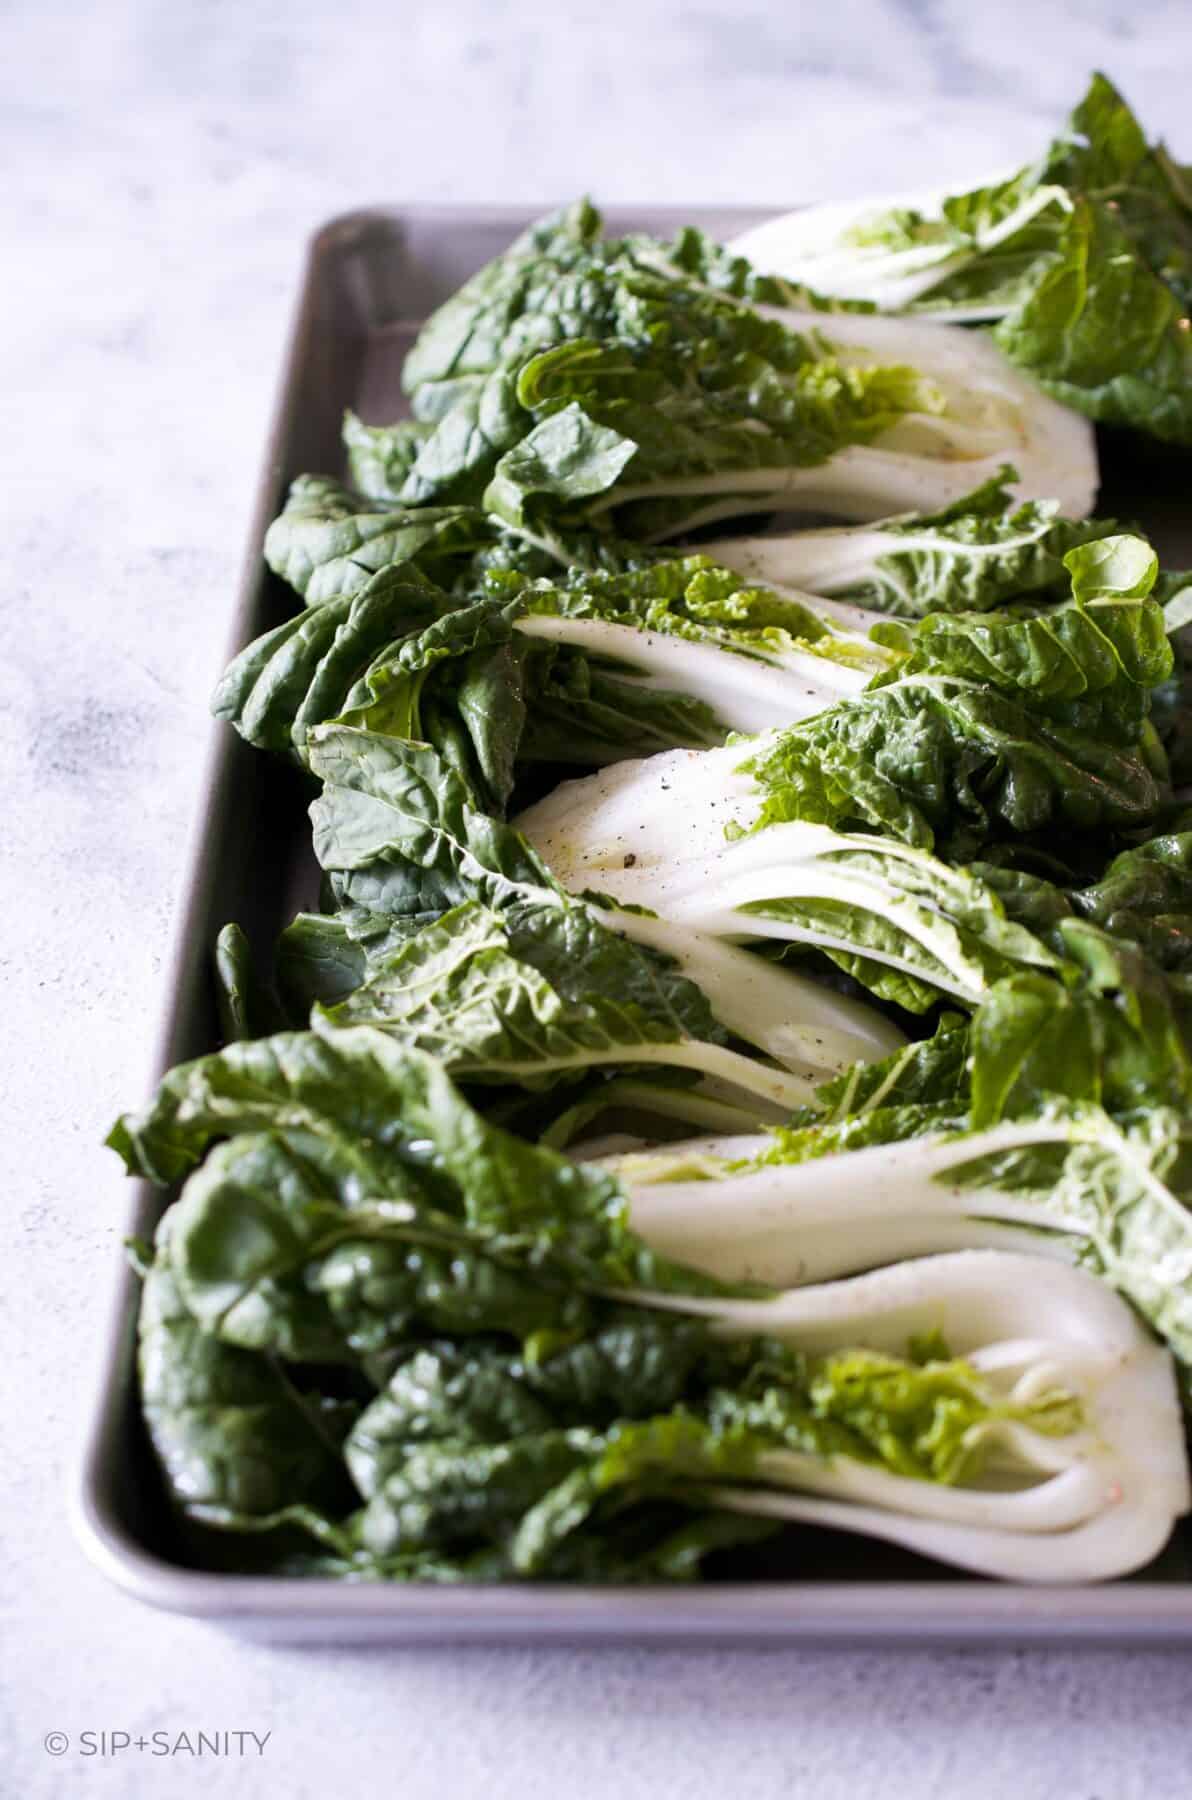 A sheet pan with an array of halved heads of baby bok choy seasoned with oil, salt and pepper.